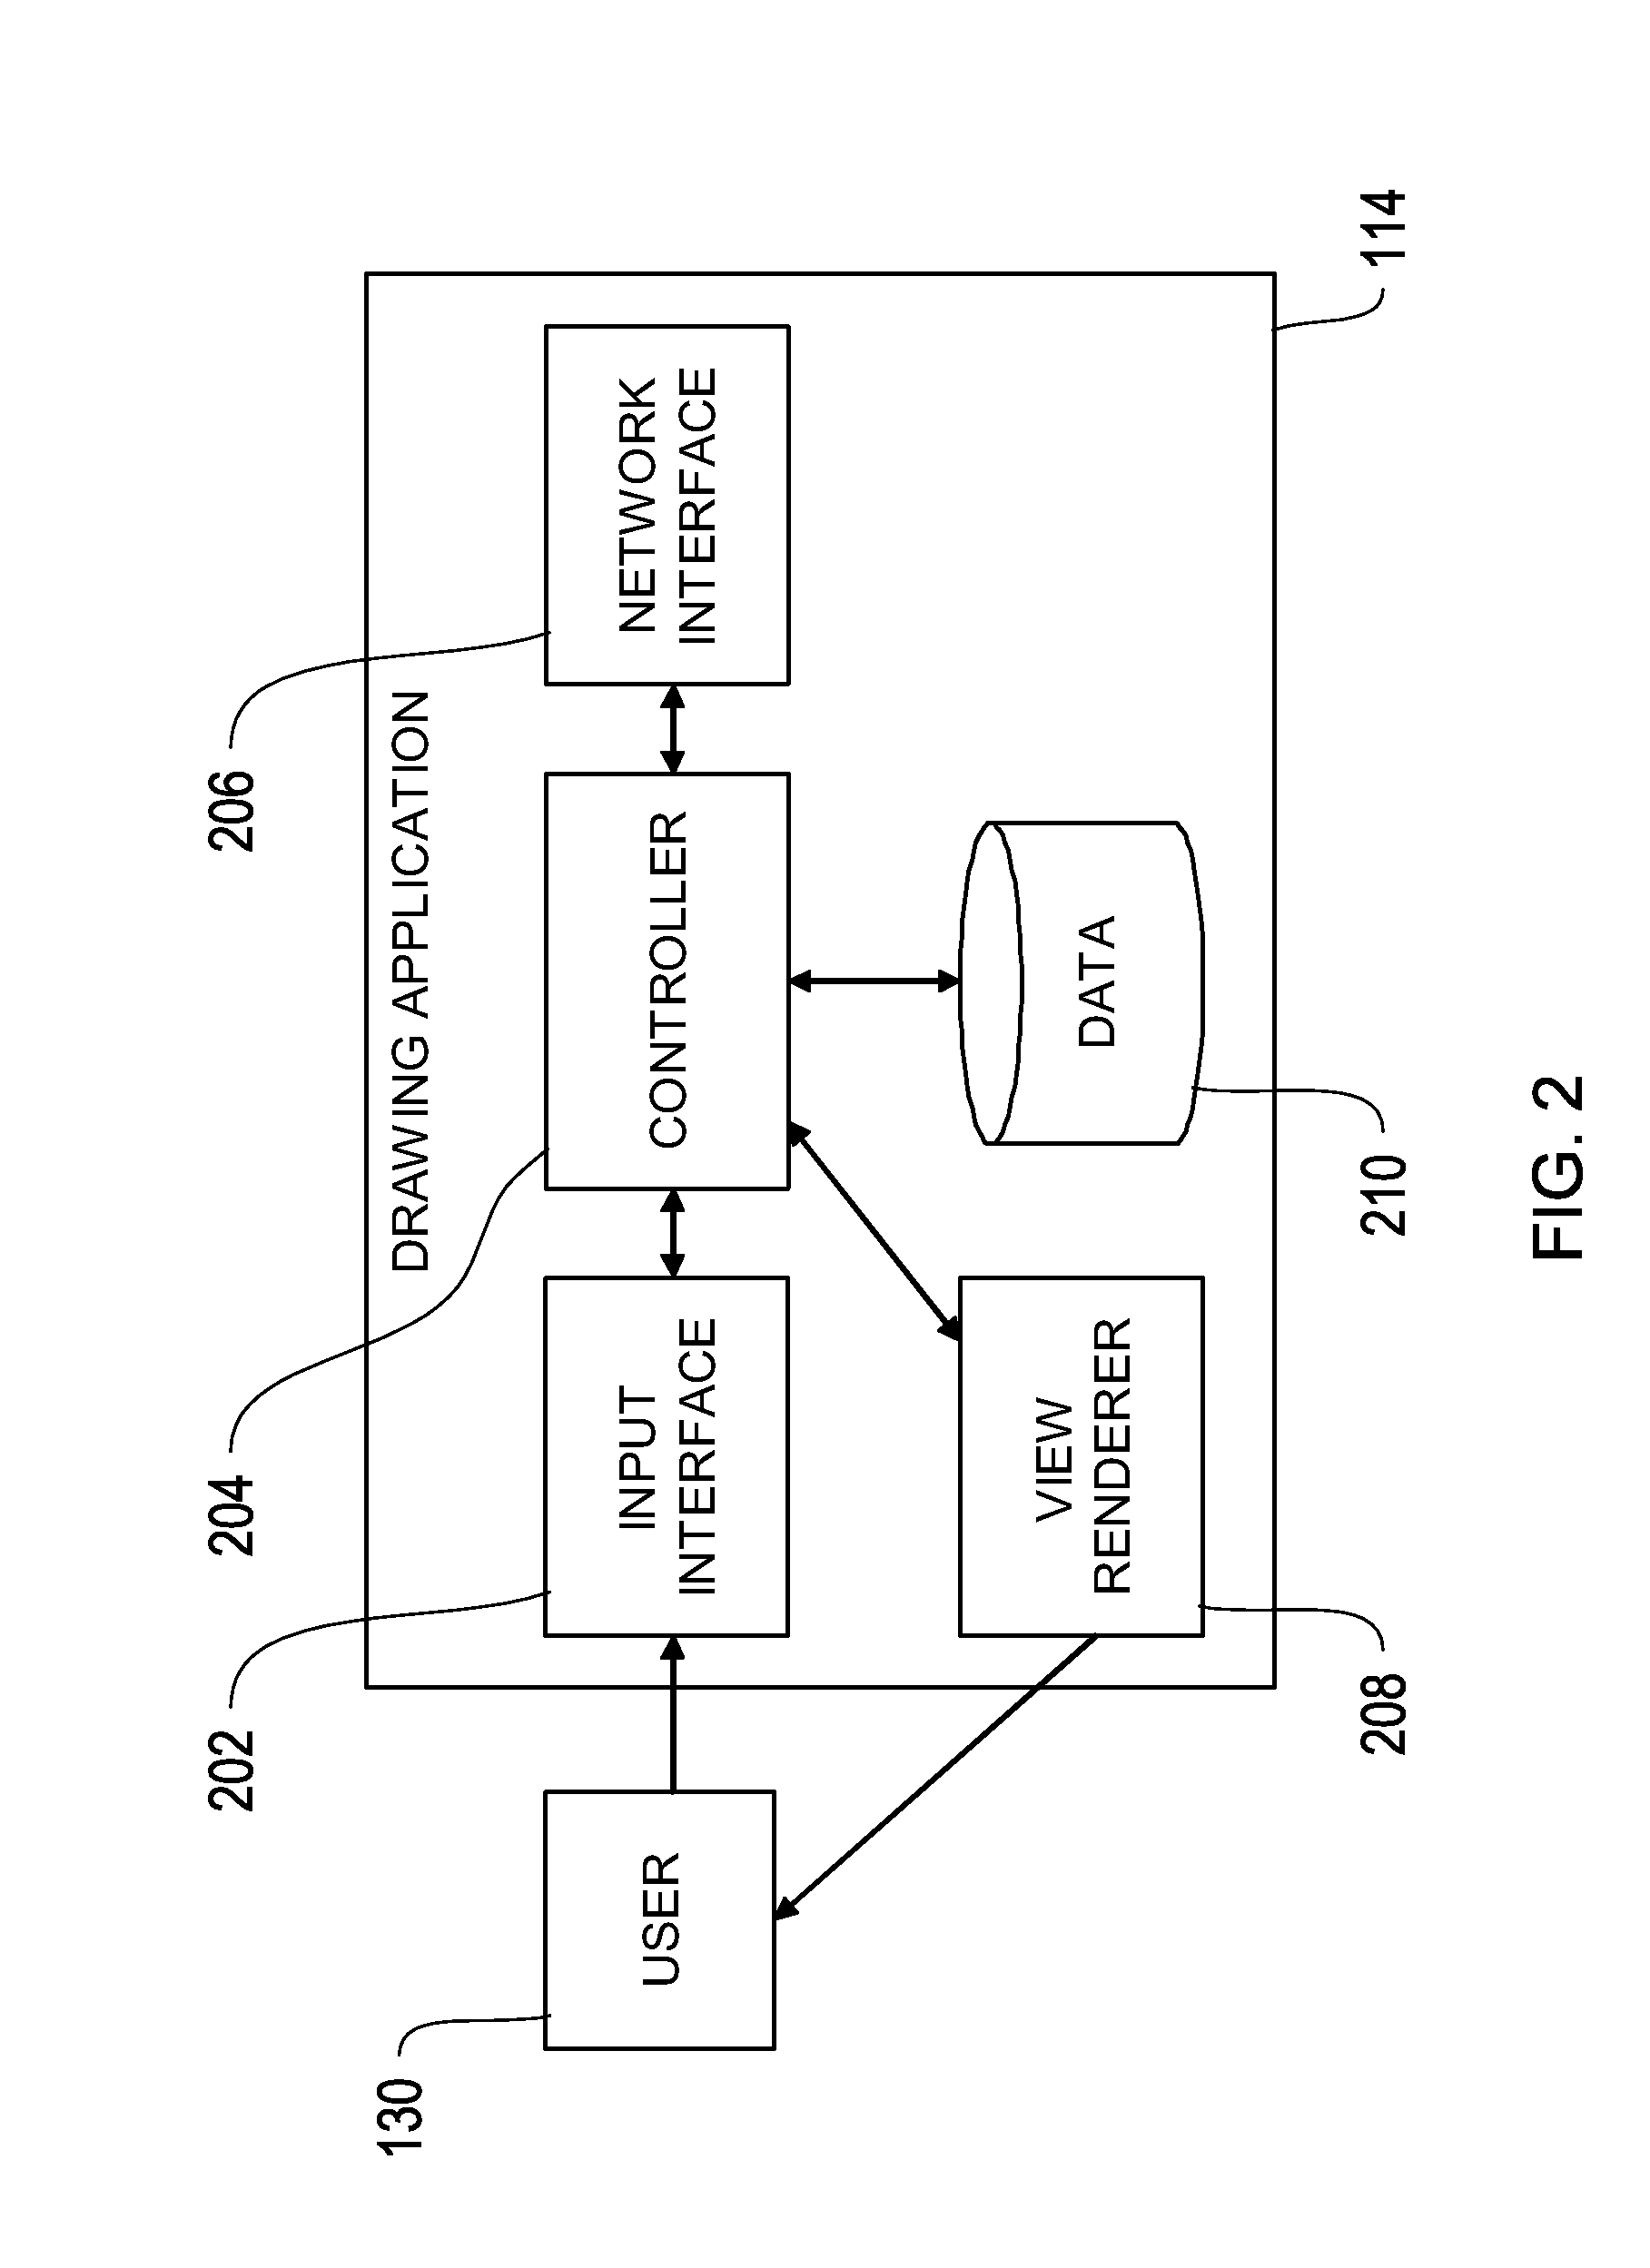 Systems and methods for animating collaborator modifications